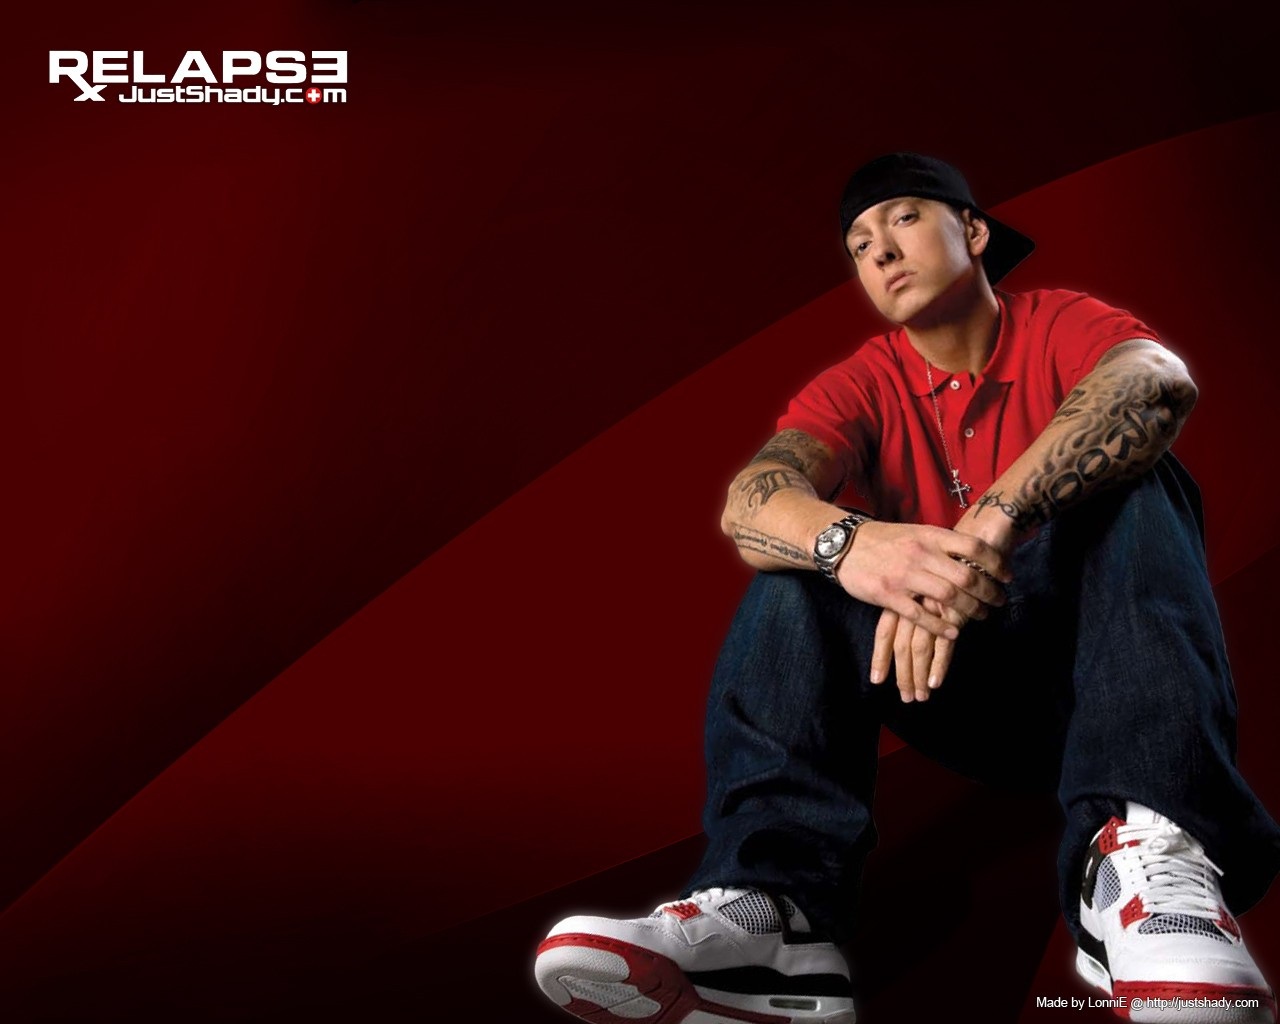 HD Eminem Relapse Wallpaper And Photos Music